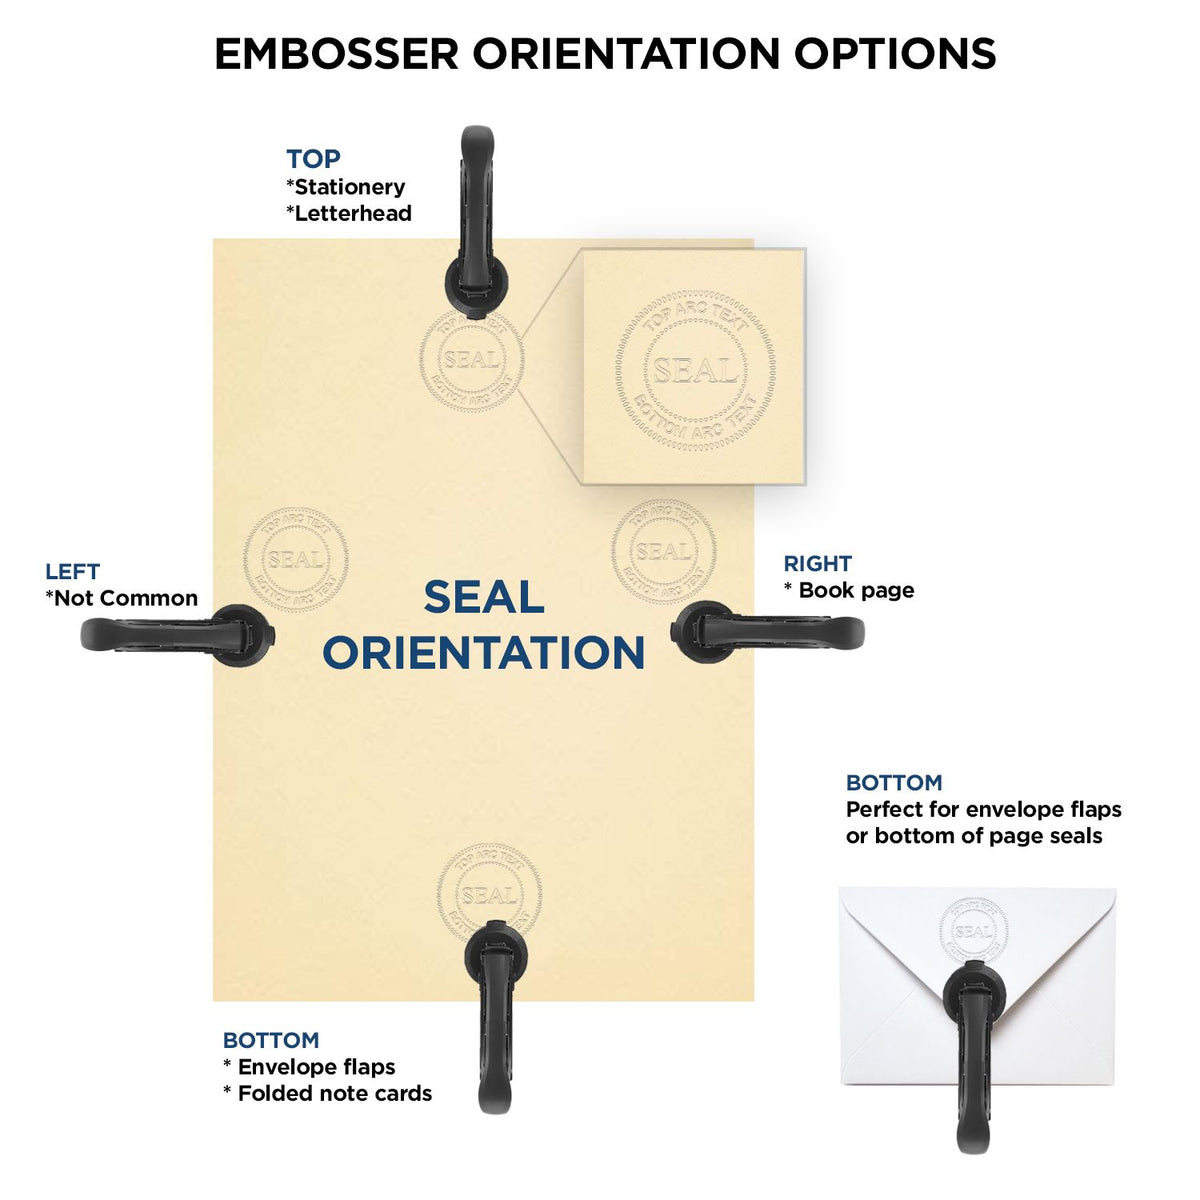 An infographic for the Heavy Duty Cast Iron Mississippi Geologist Seal Embosser showing embosser orientation, this is showing examples of a top, bottom, right and left insert.